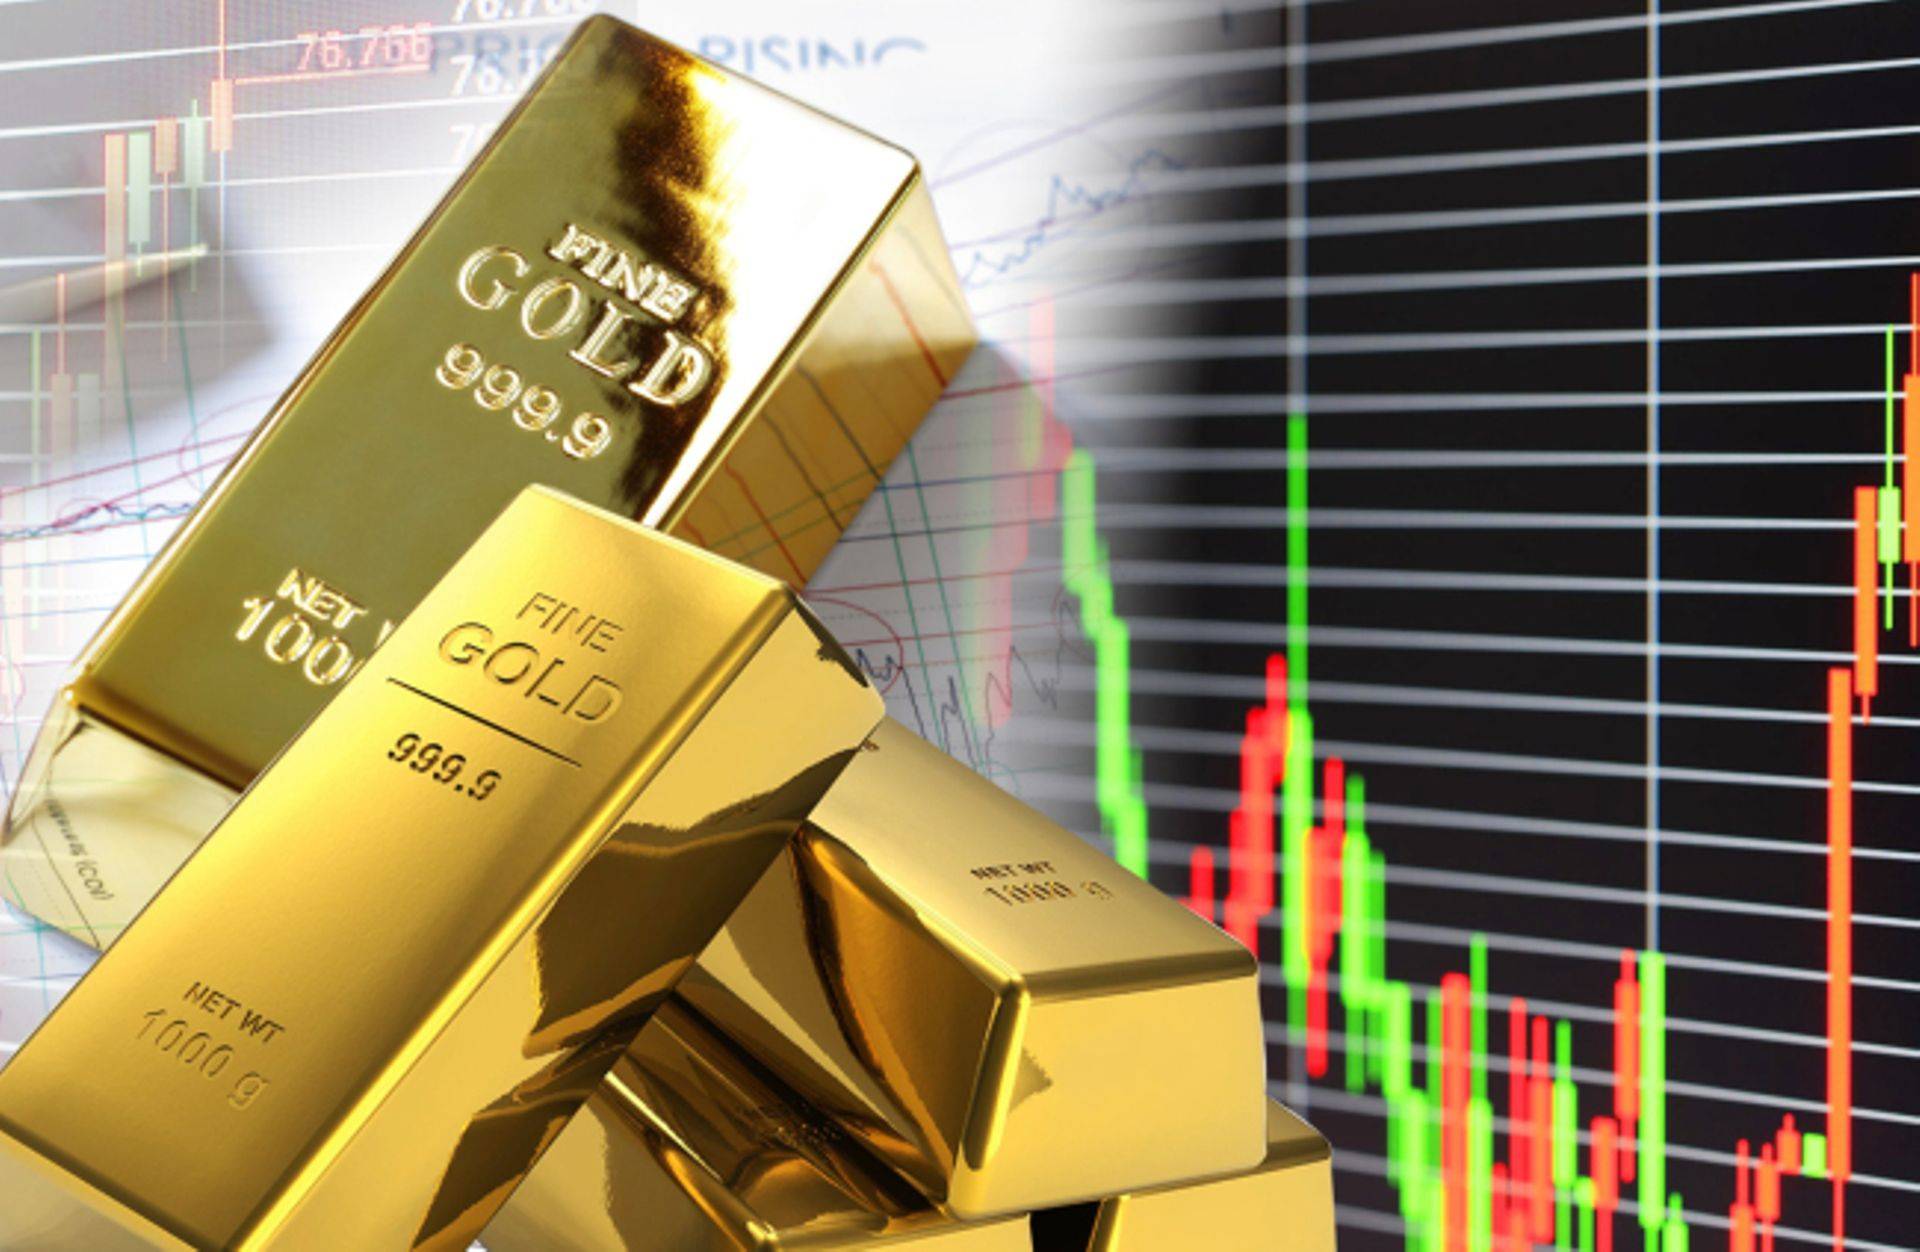 Gold price surges amidst geopolitical tensions and Fed rate cut hopes